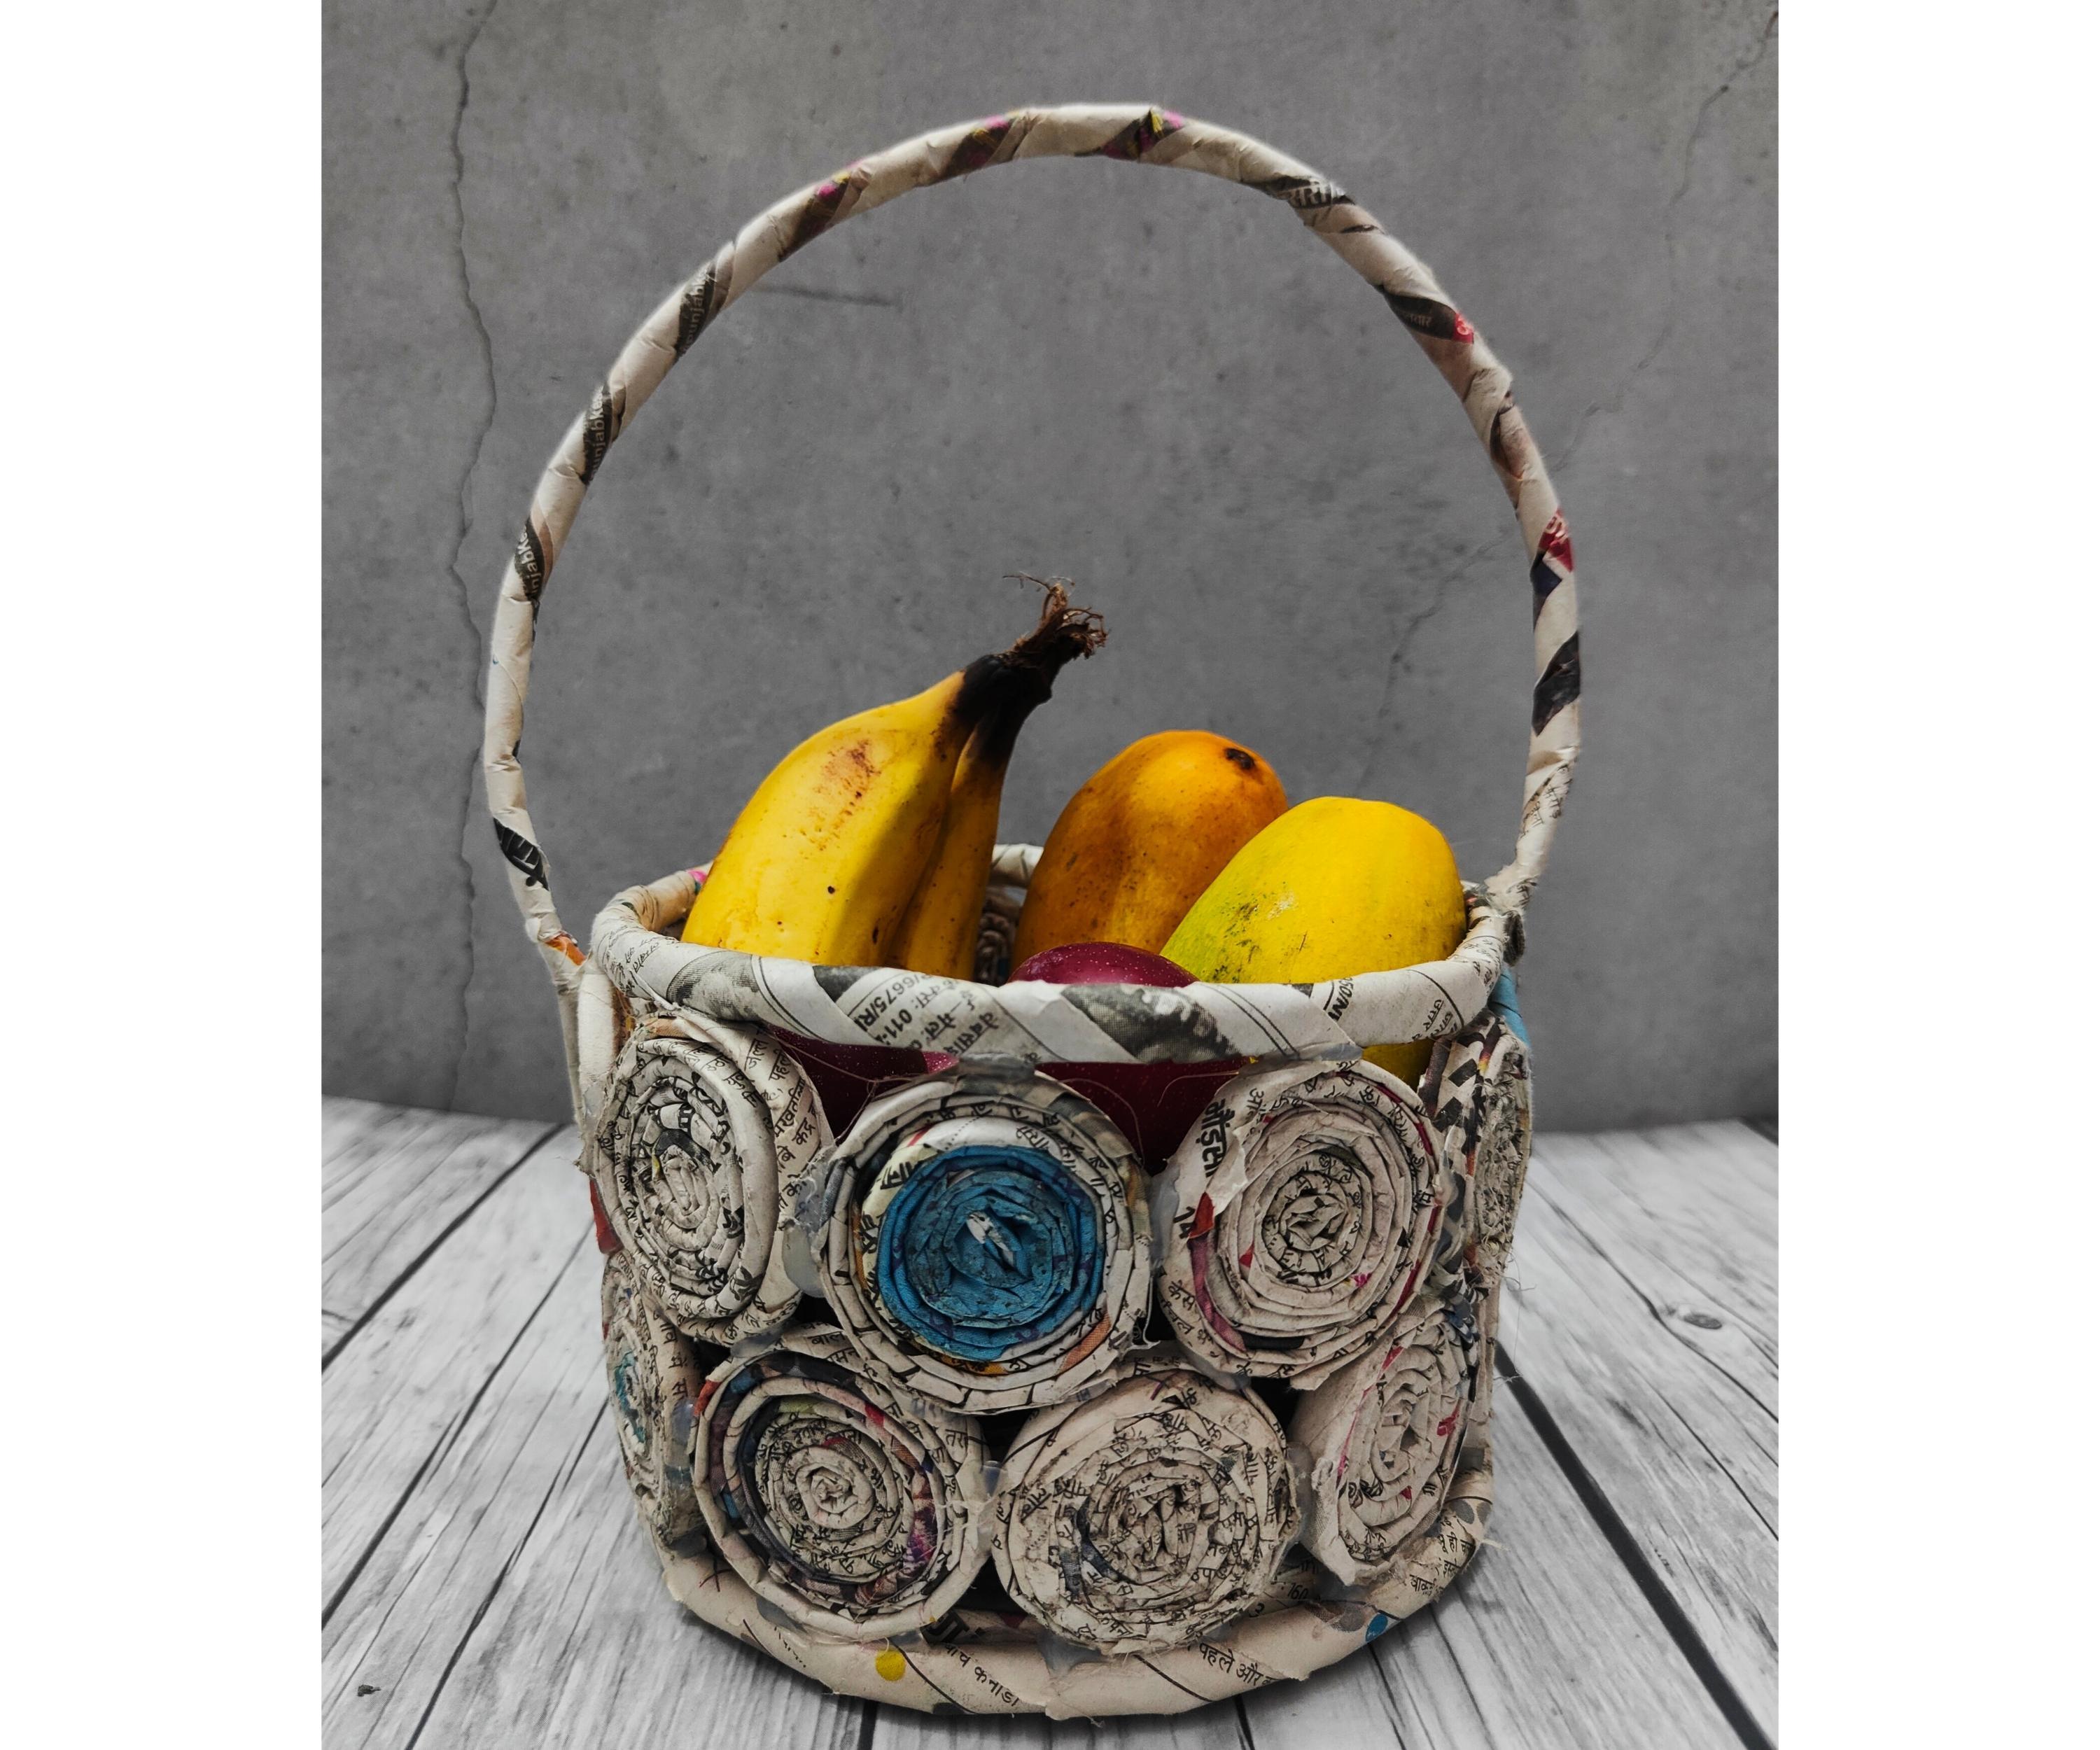 DIY Crafted Paper Basket: Made From Waste Newspapers